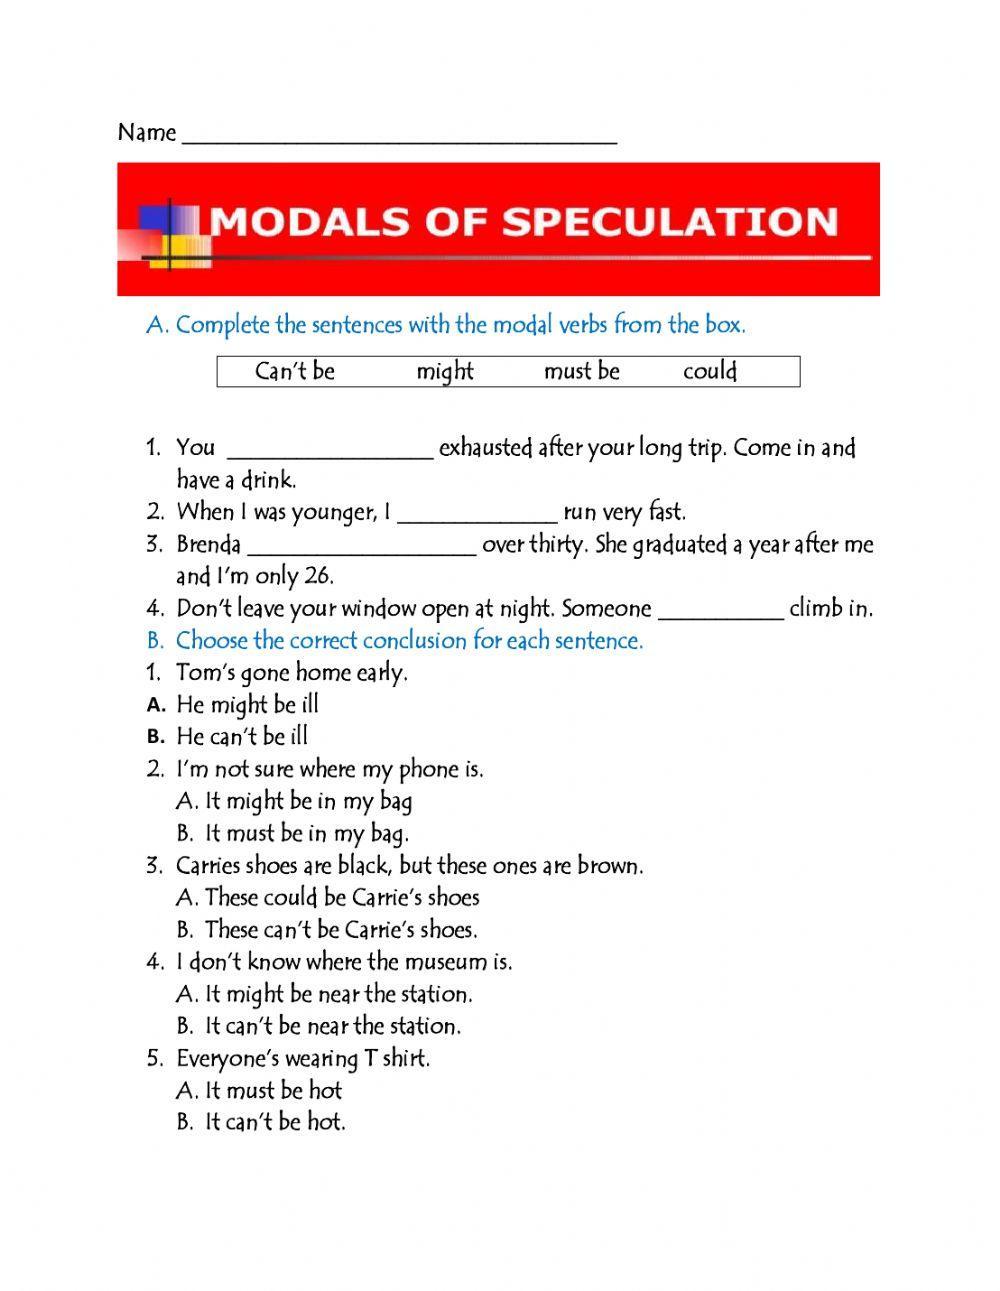 Modal verbs of speculation